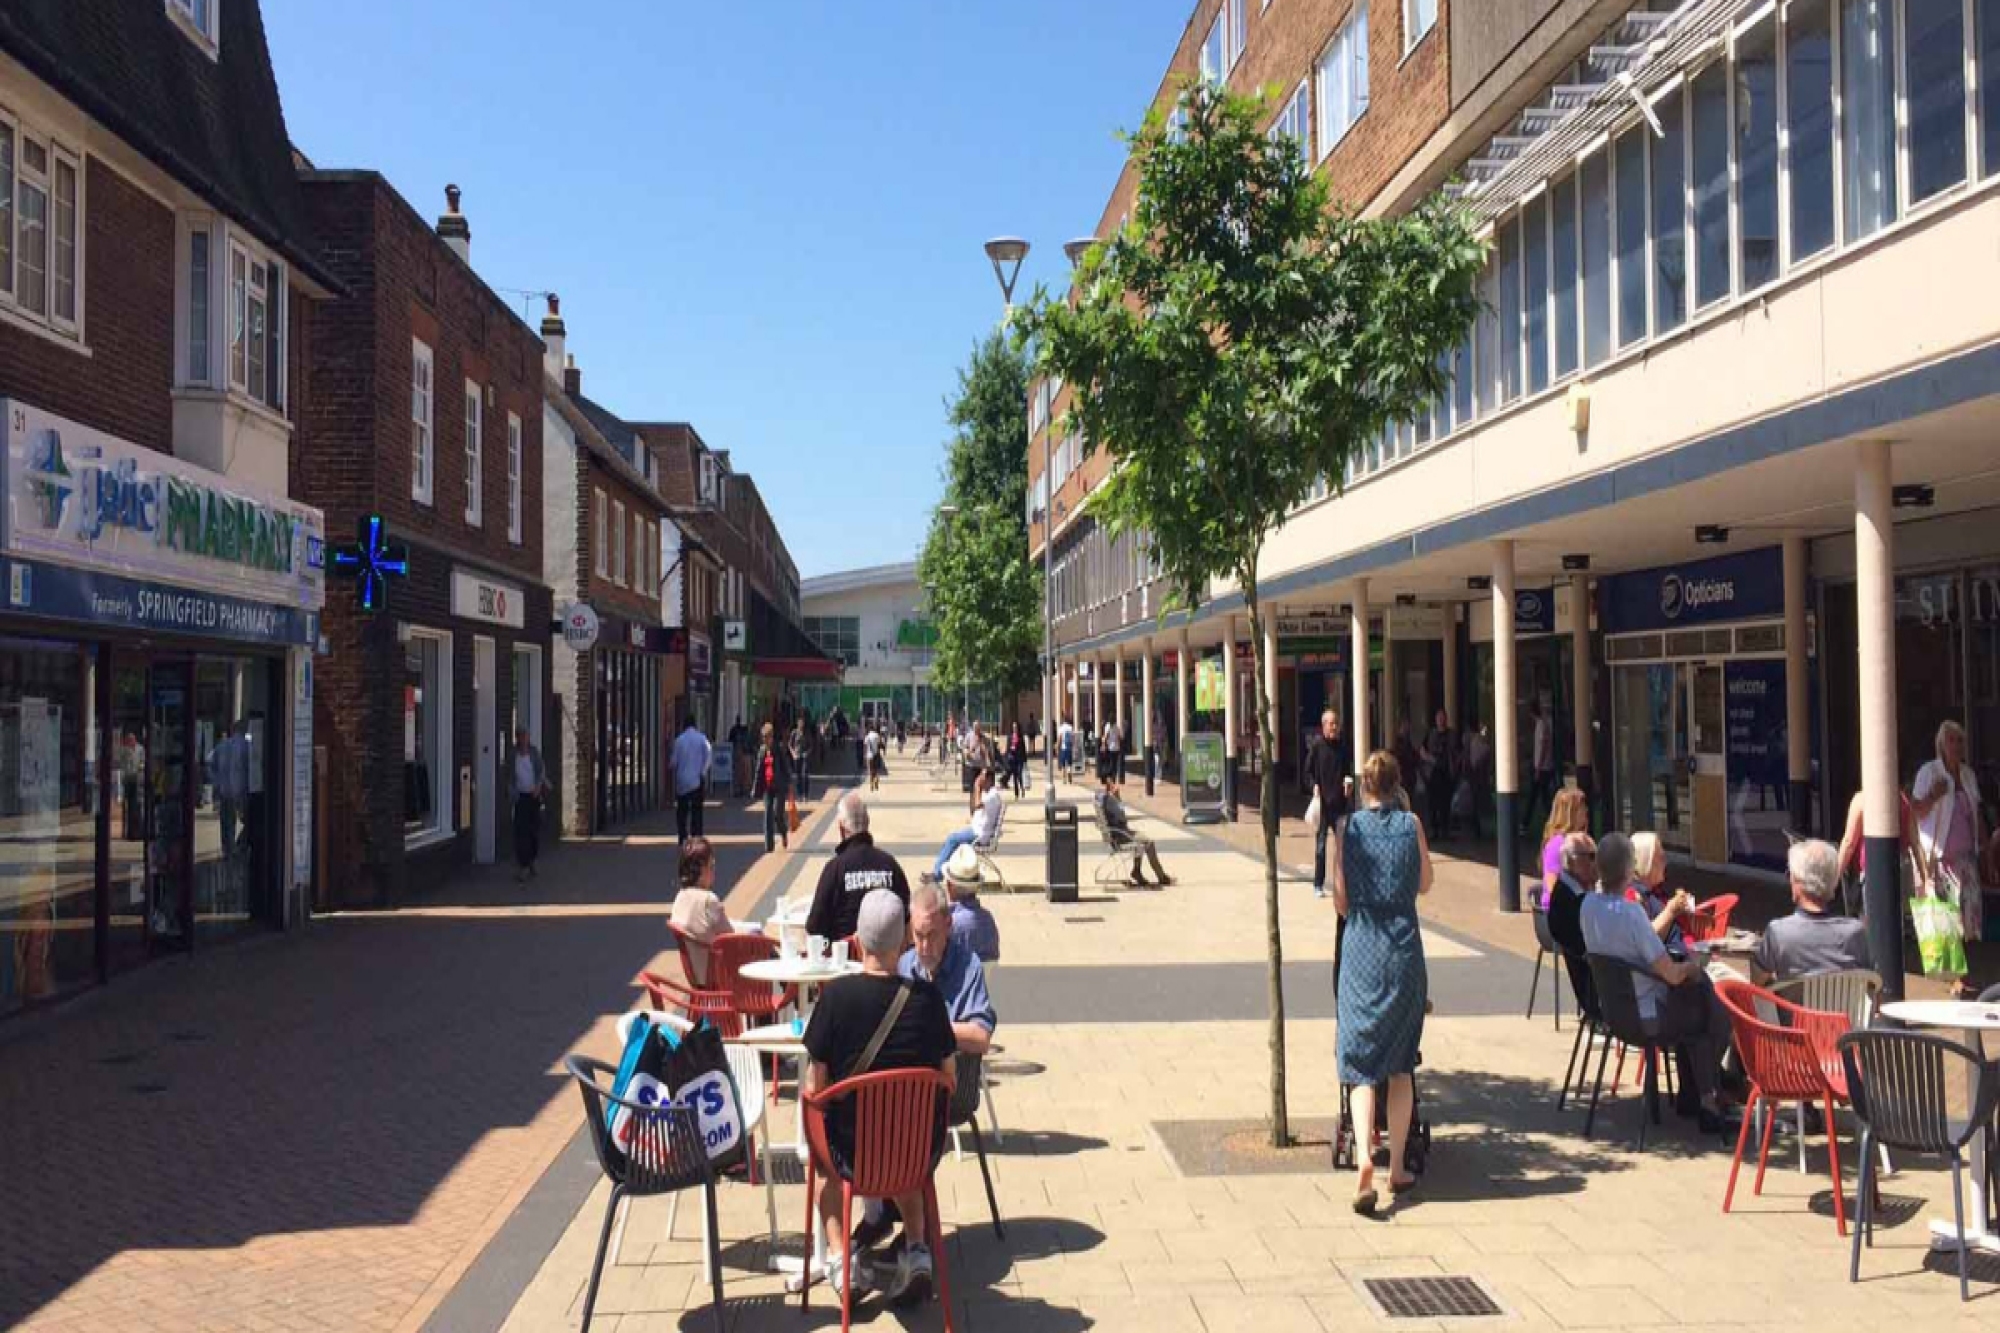 Hatfield White Lion Square. Shops with people sitting outside cafes.